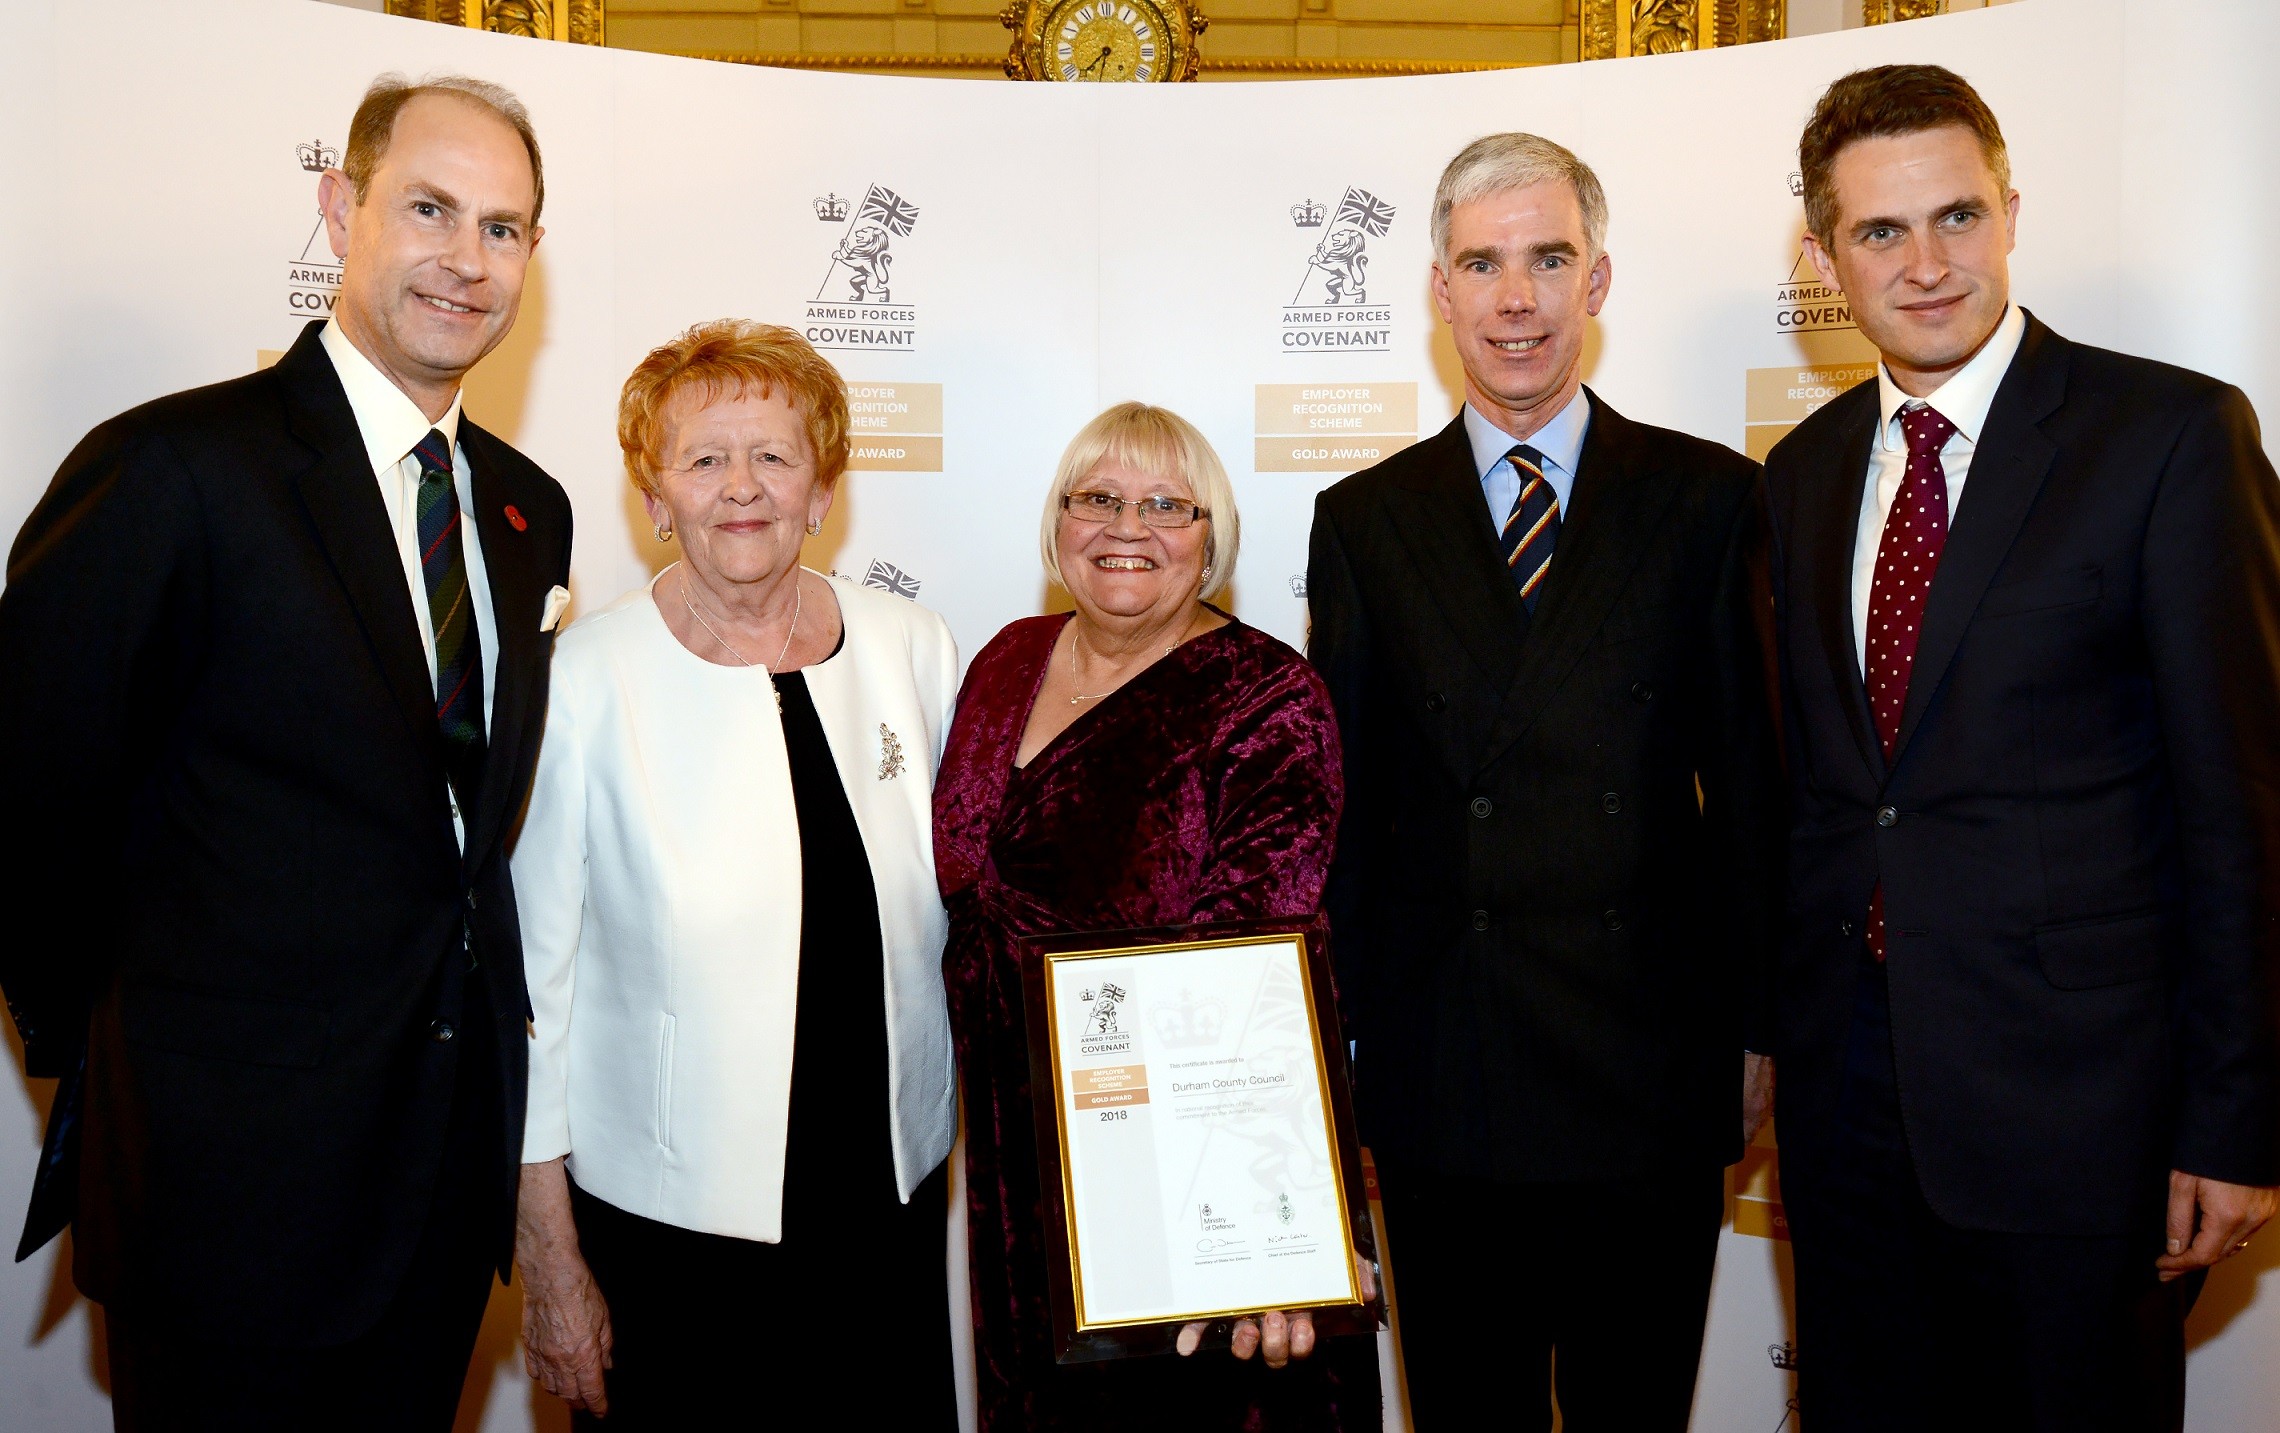 Armed-Forces-Friendly Employer Recognised